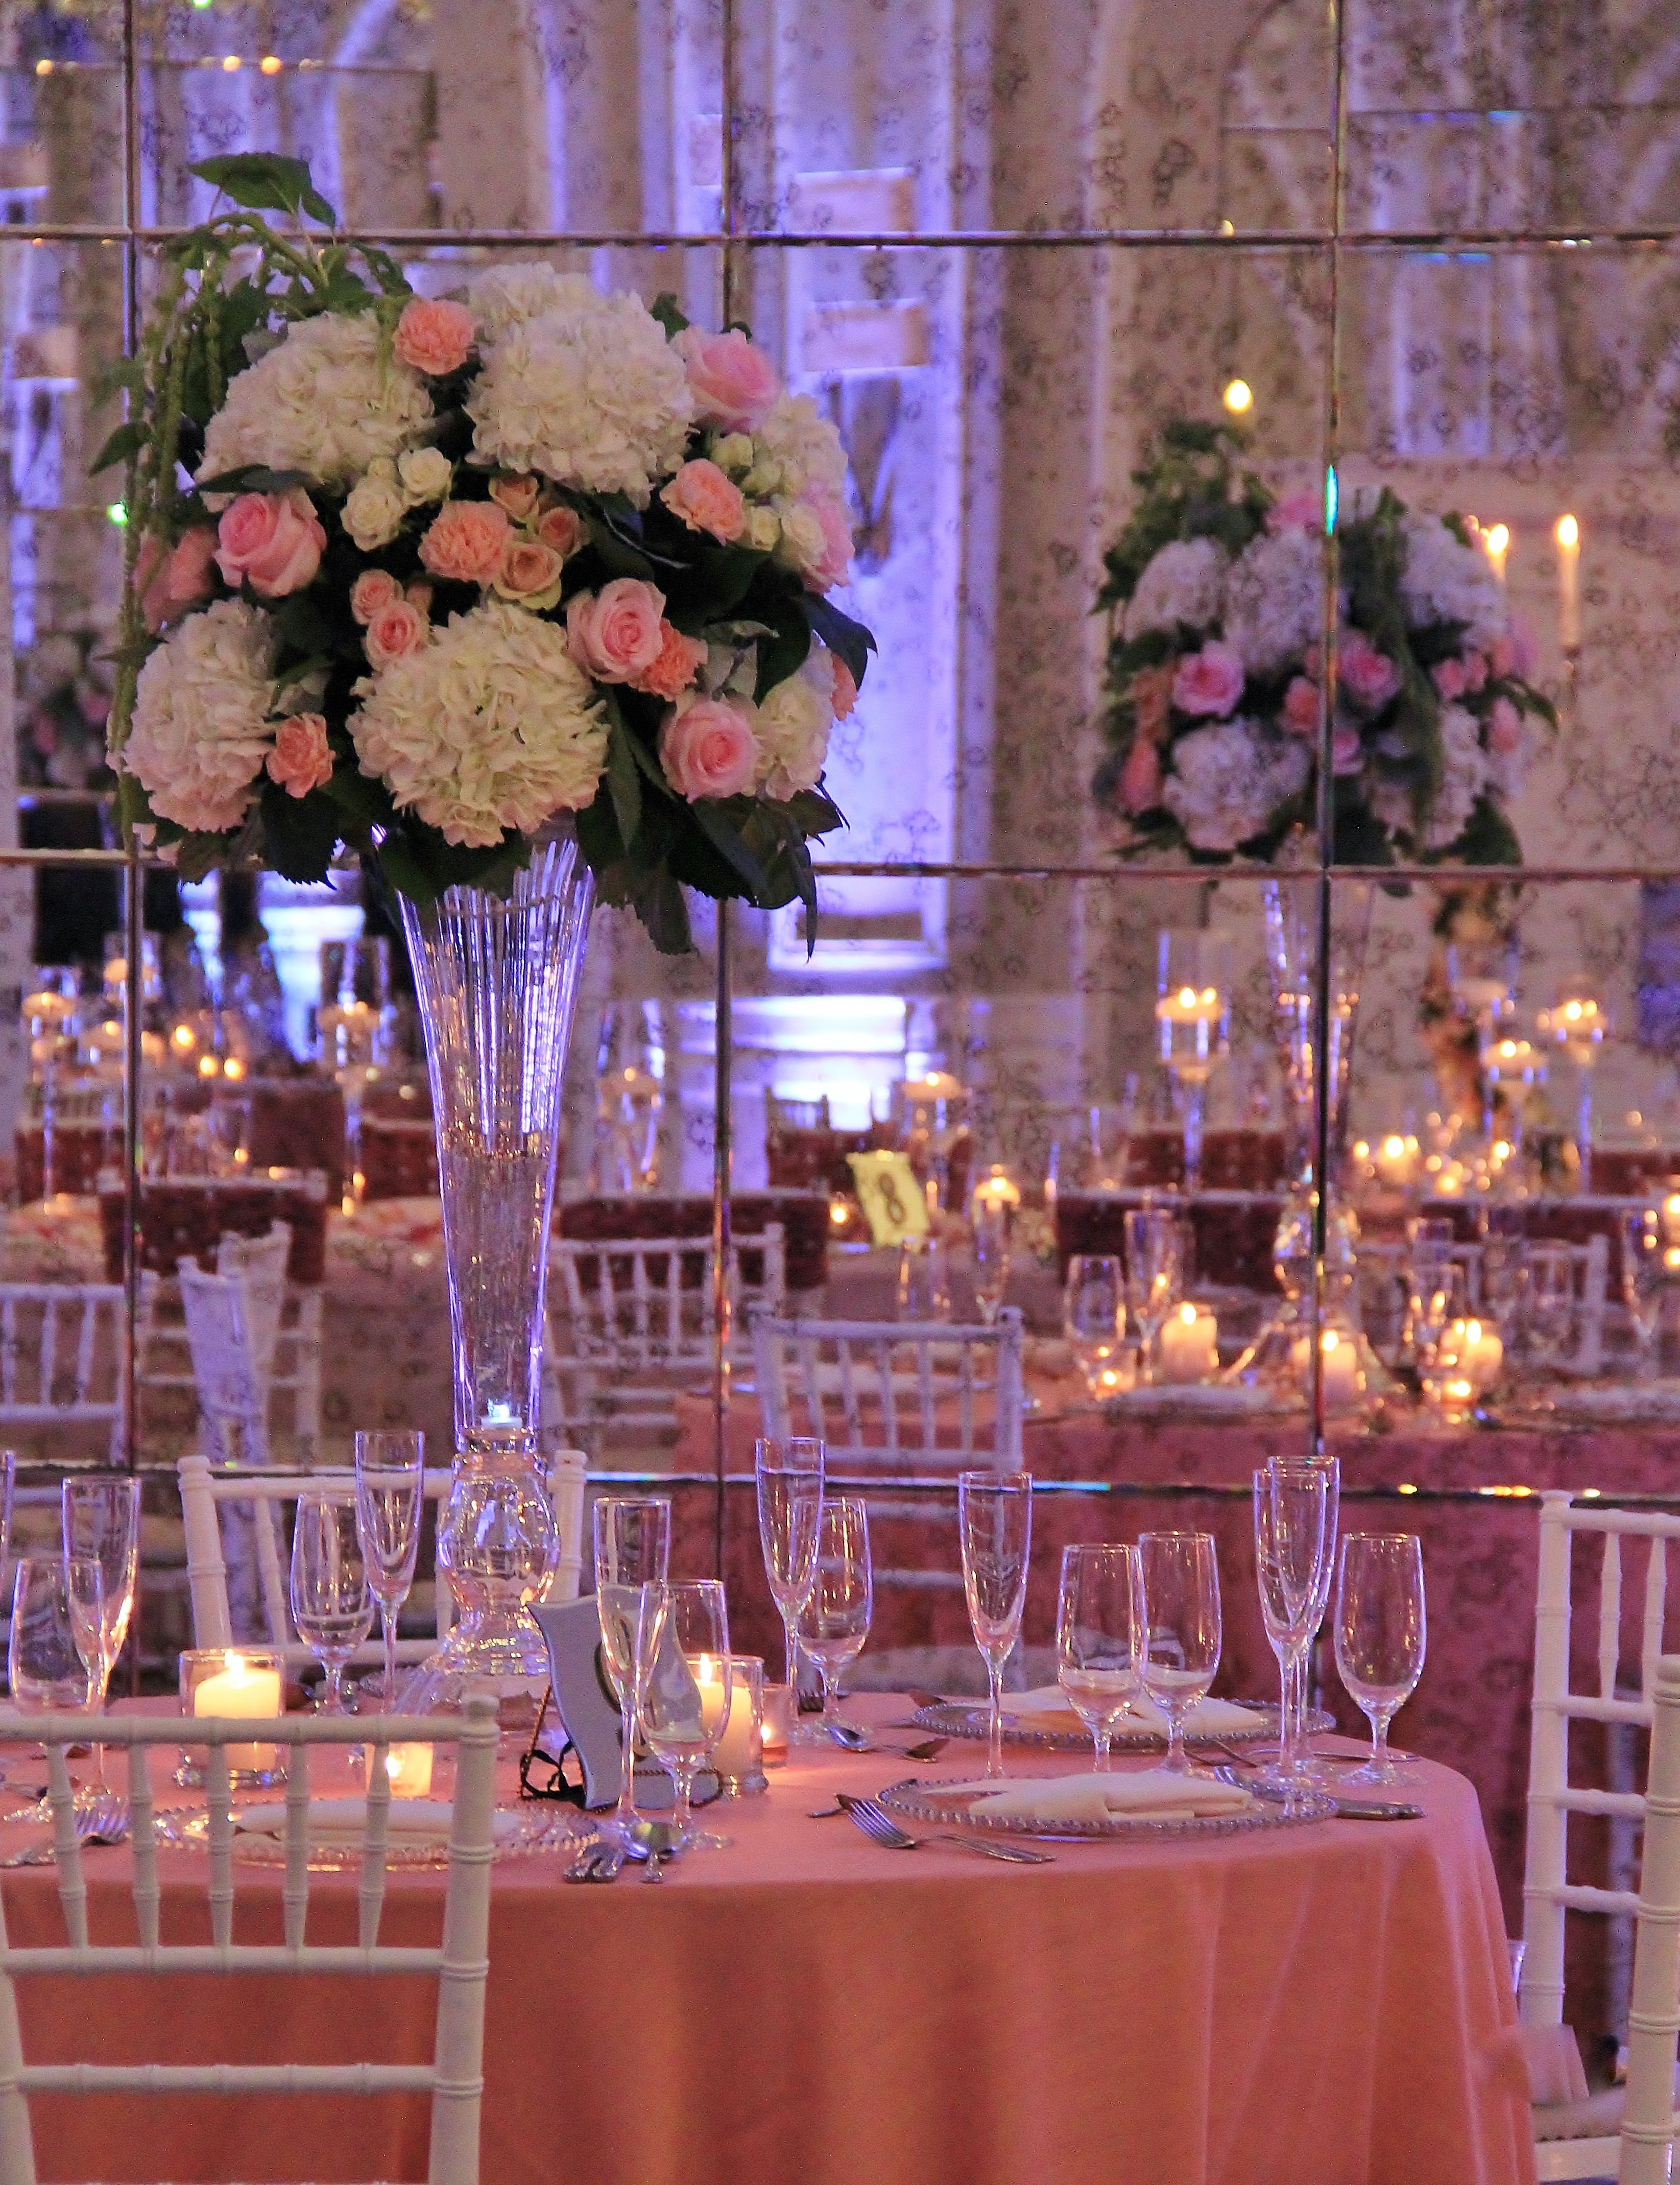 23 Lovely Floral Vases and Containers wholesale 2024 free download floral vases and containers wholesale of 15 beautiful rose gold vases bulk bogekompresorturkiye com inside wedding floral centerpieces fresh trumpet vases filled at the crystal ballroom with